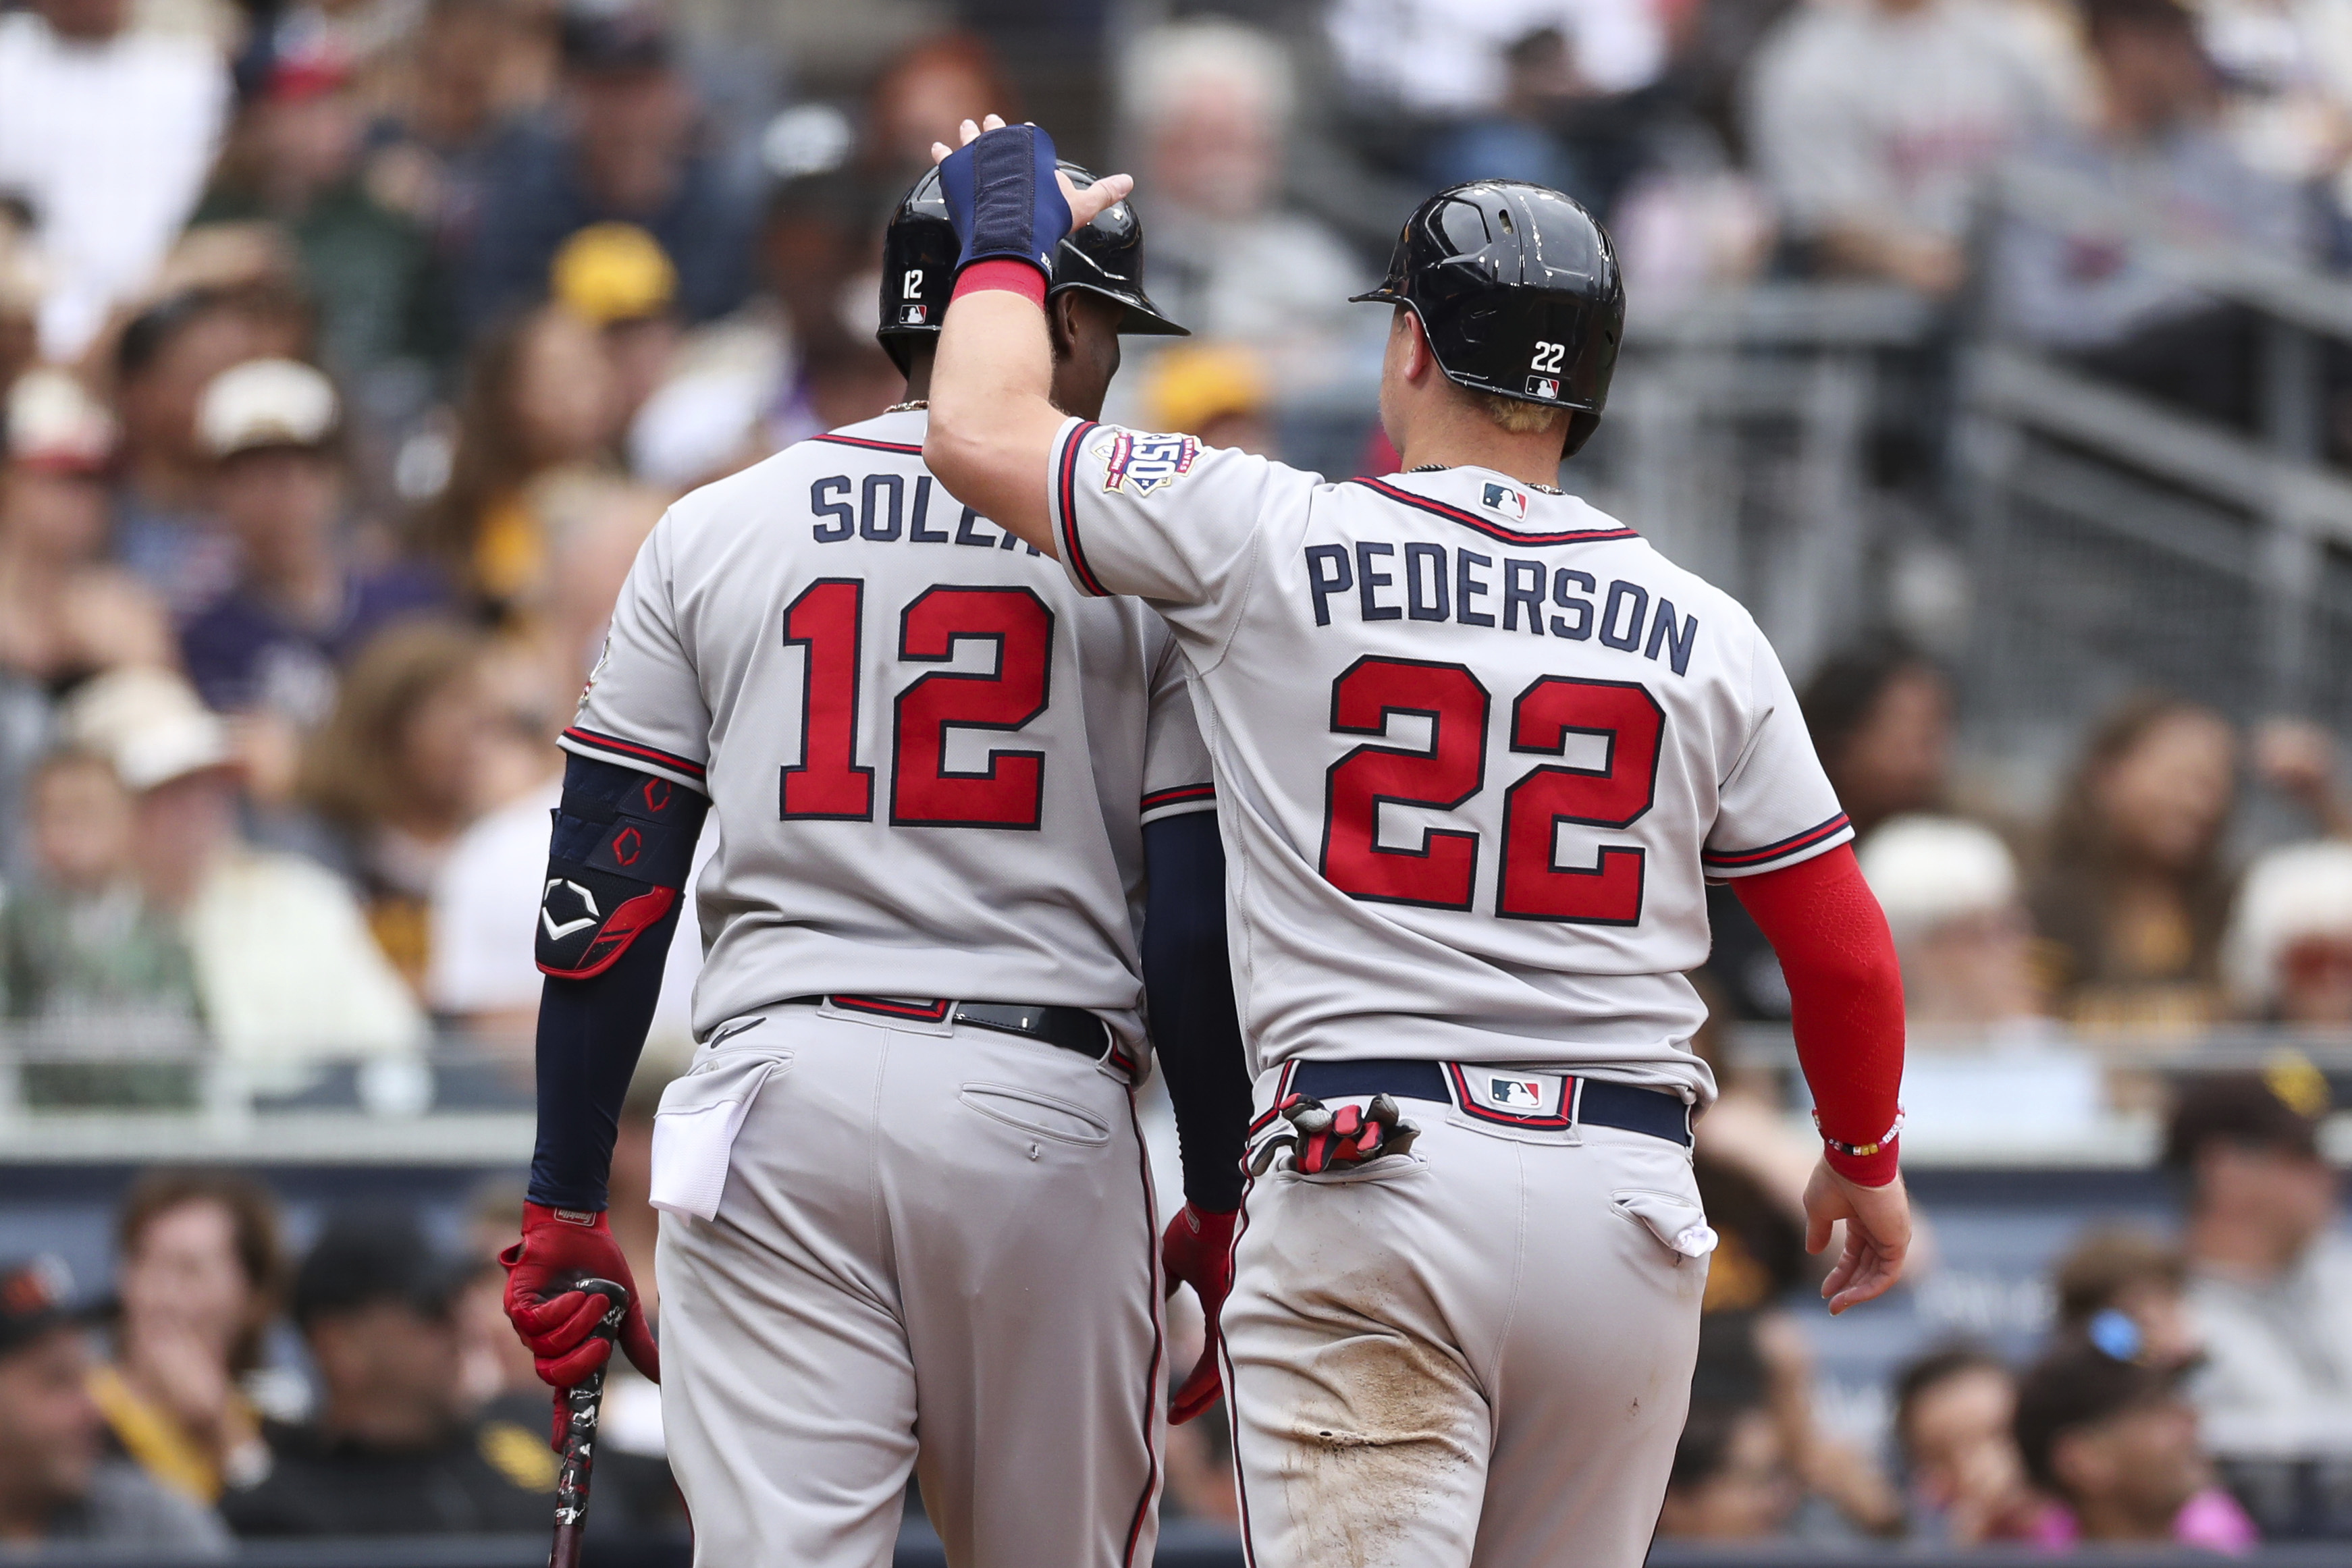 Braves manager Brian Snitker's message after benching Marcell